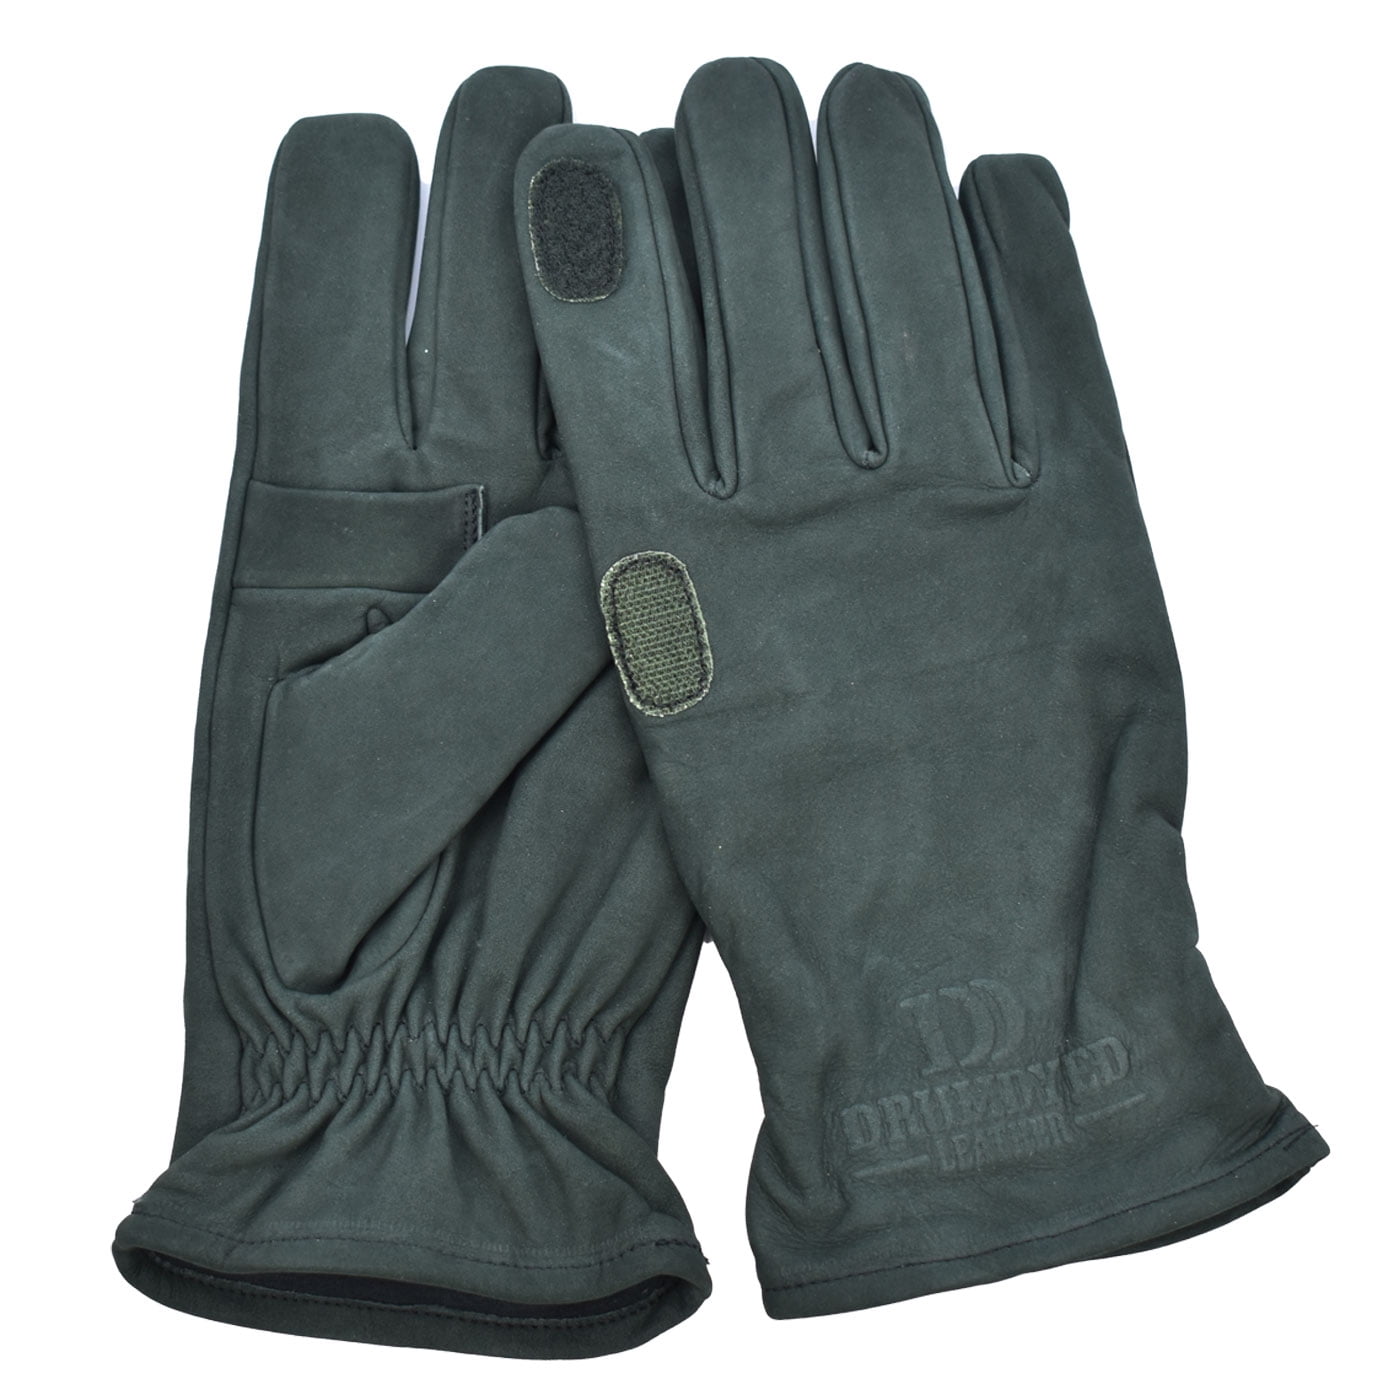 Shooting Gloves Soft Leather Size Small 